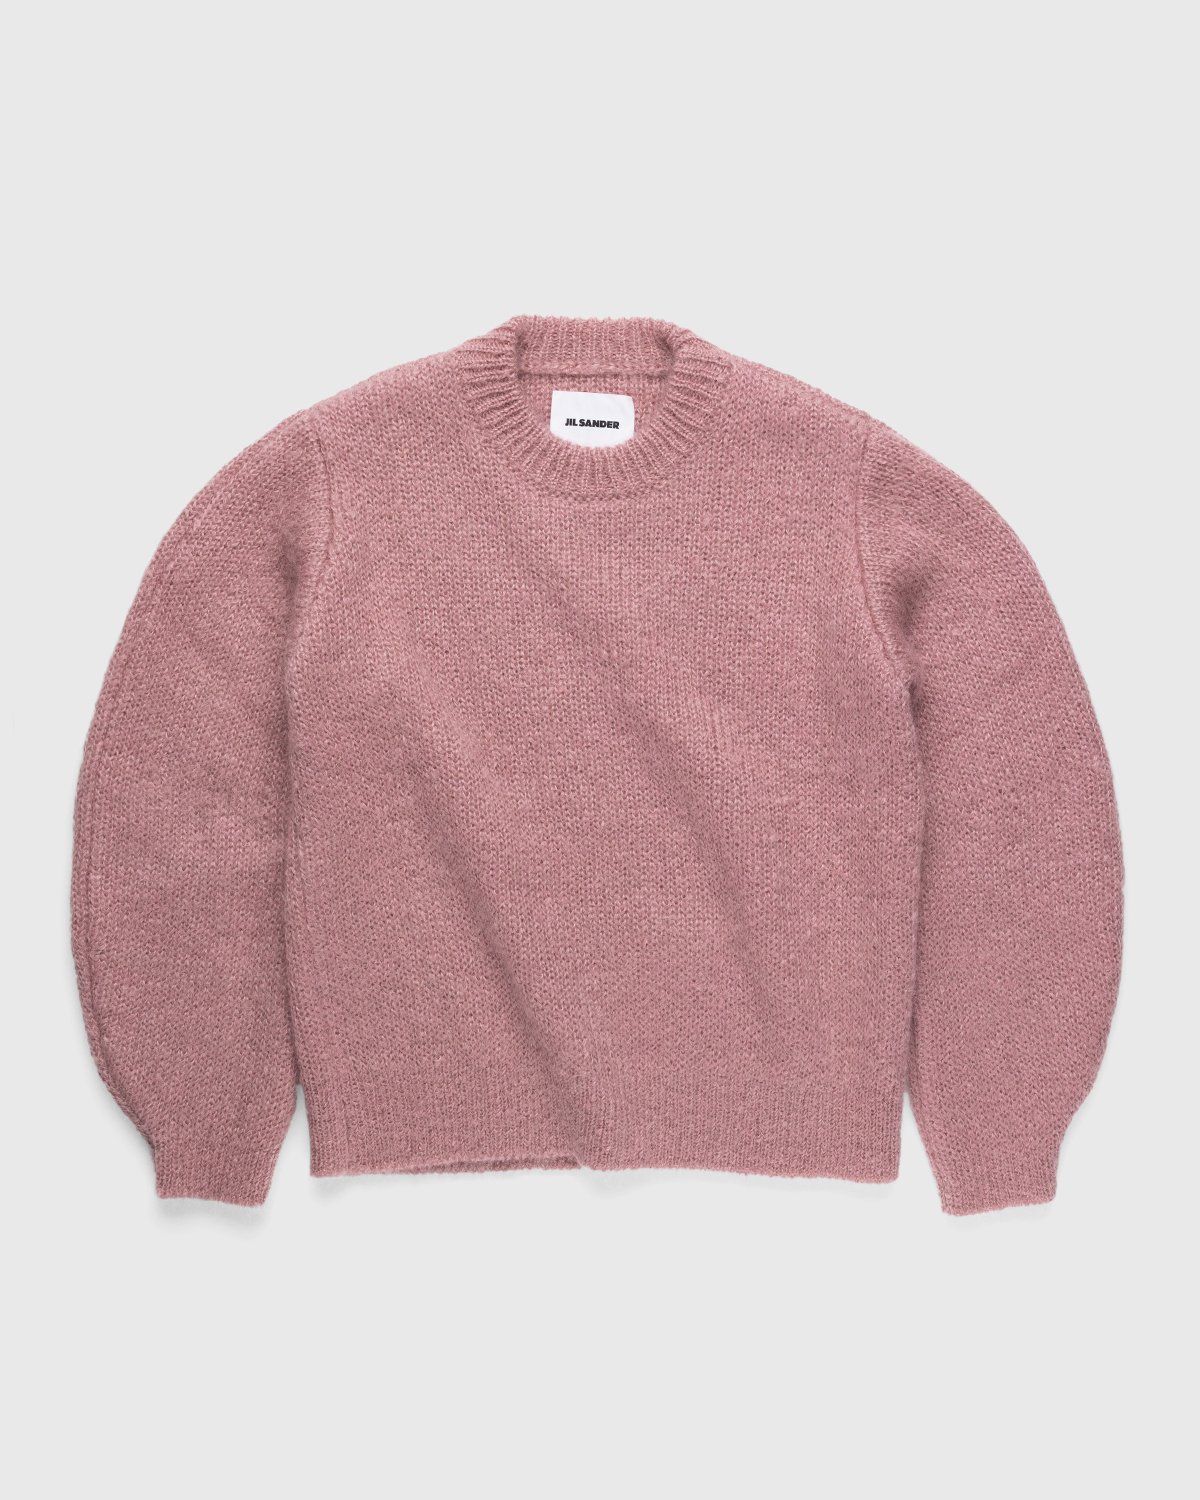 Jil Sander - Knitted Sweater Pink - Clothing - Pink - Image 1